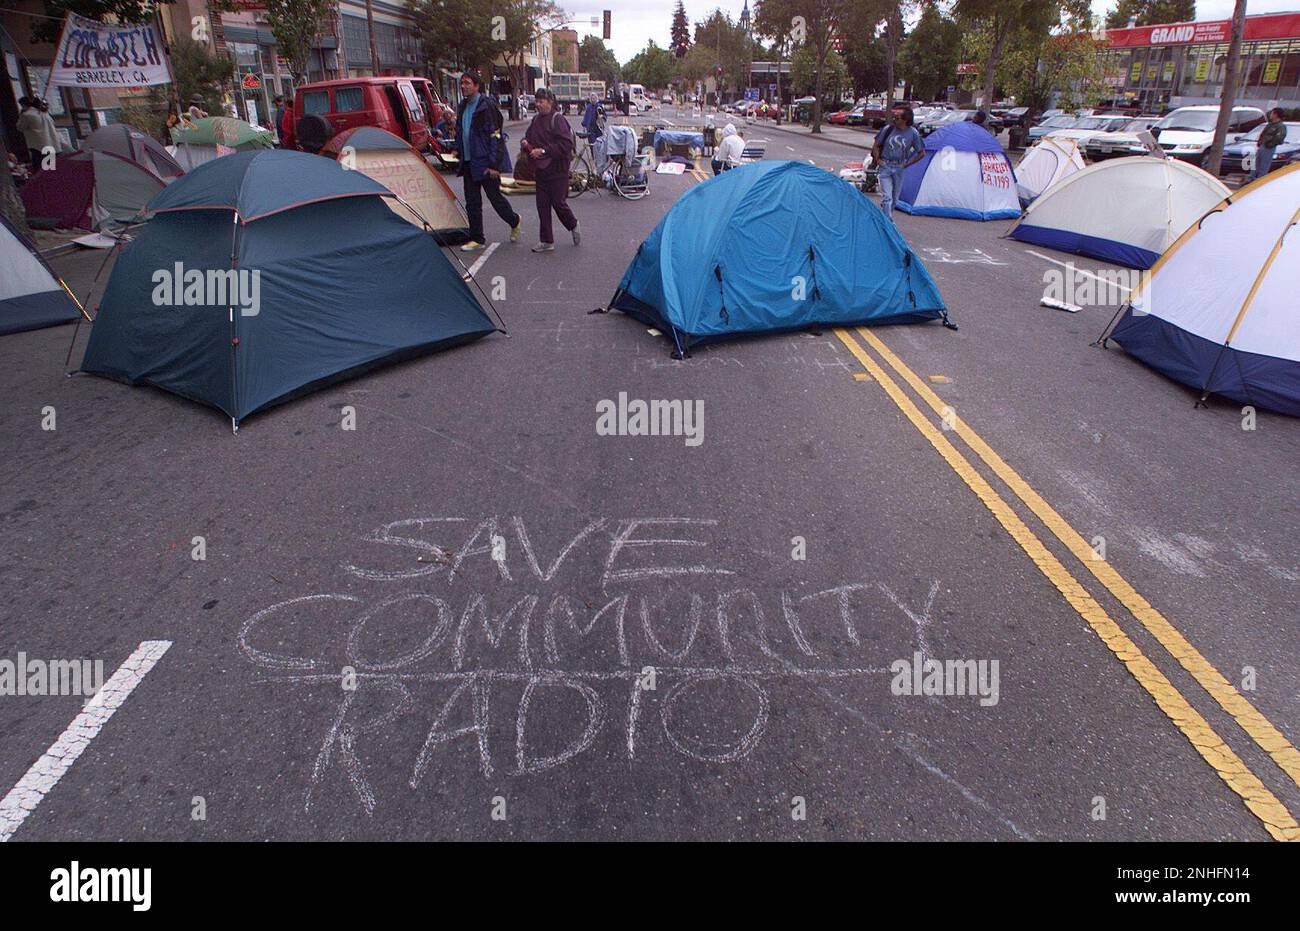 KPFA 1-C-20JUL99-MN-MAC KPFA Radio in Berkely. Ongoing protest from  supporters of the radio station against management who have recently shook  up the staff by firing many of the employess. A tent city